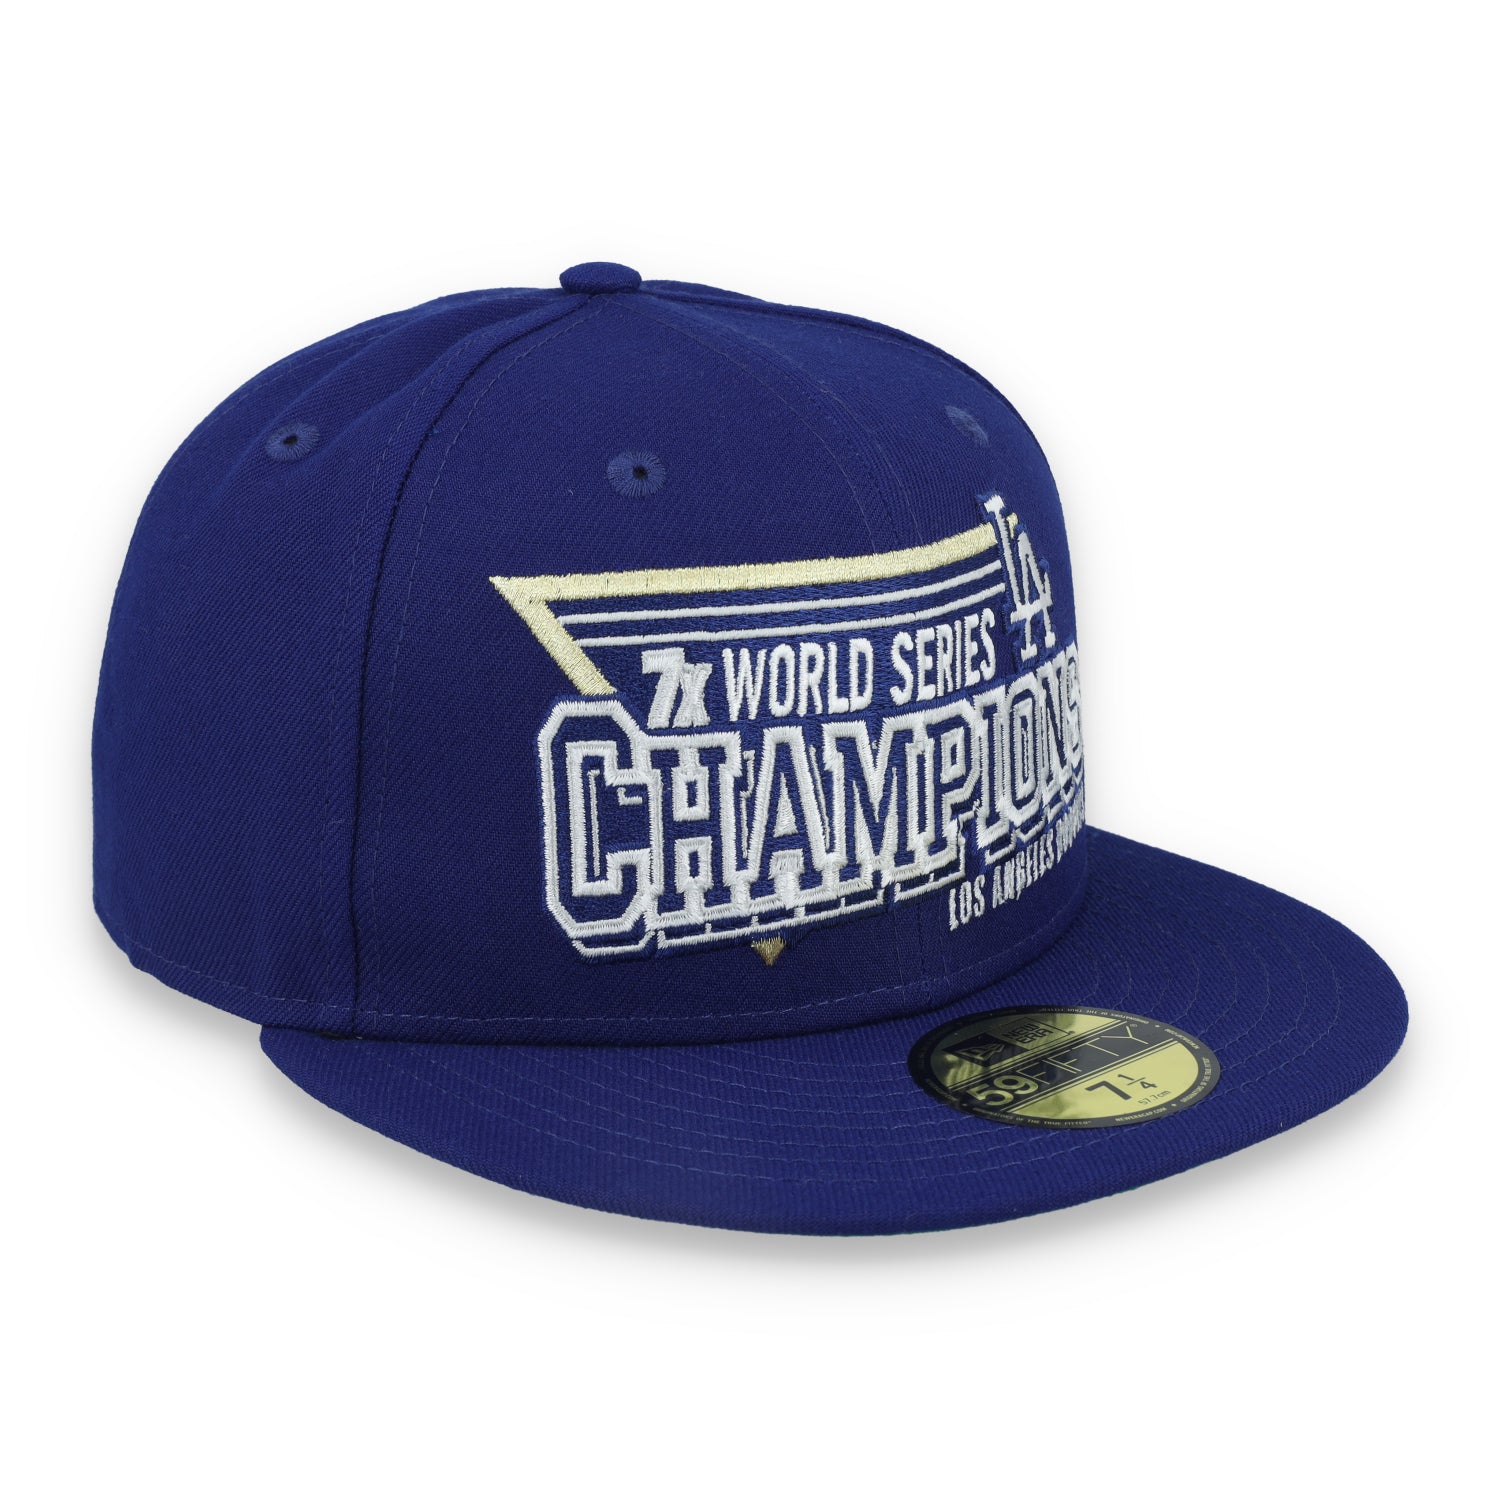 New Era Los Angeles Dodgers 7x Champions Throwback 59FIFTY Fitted Hat